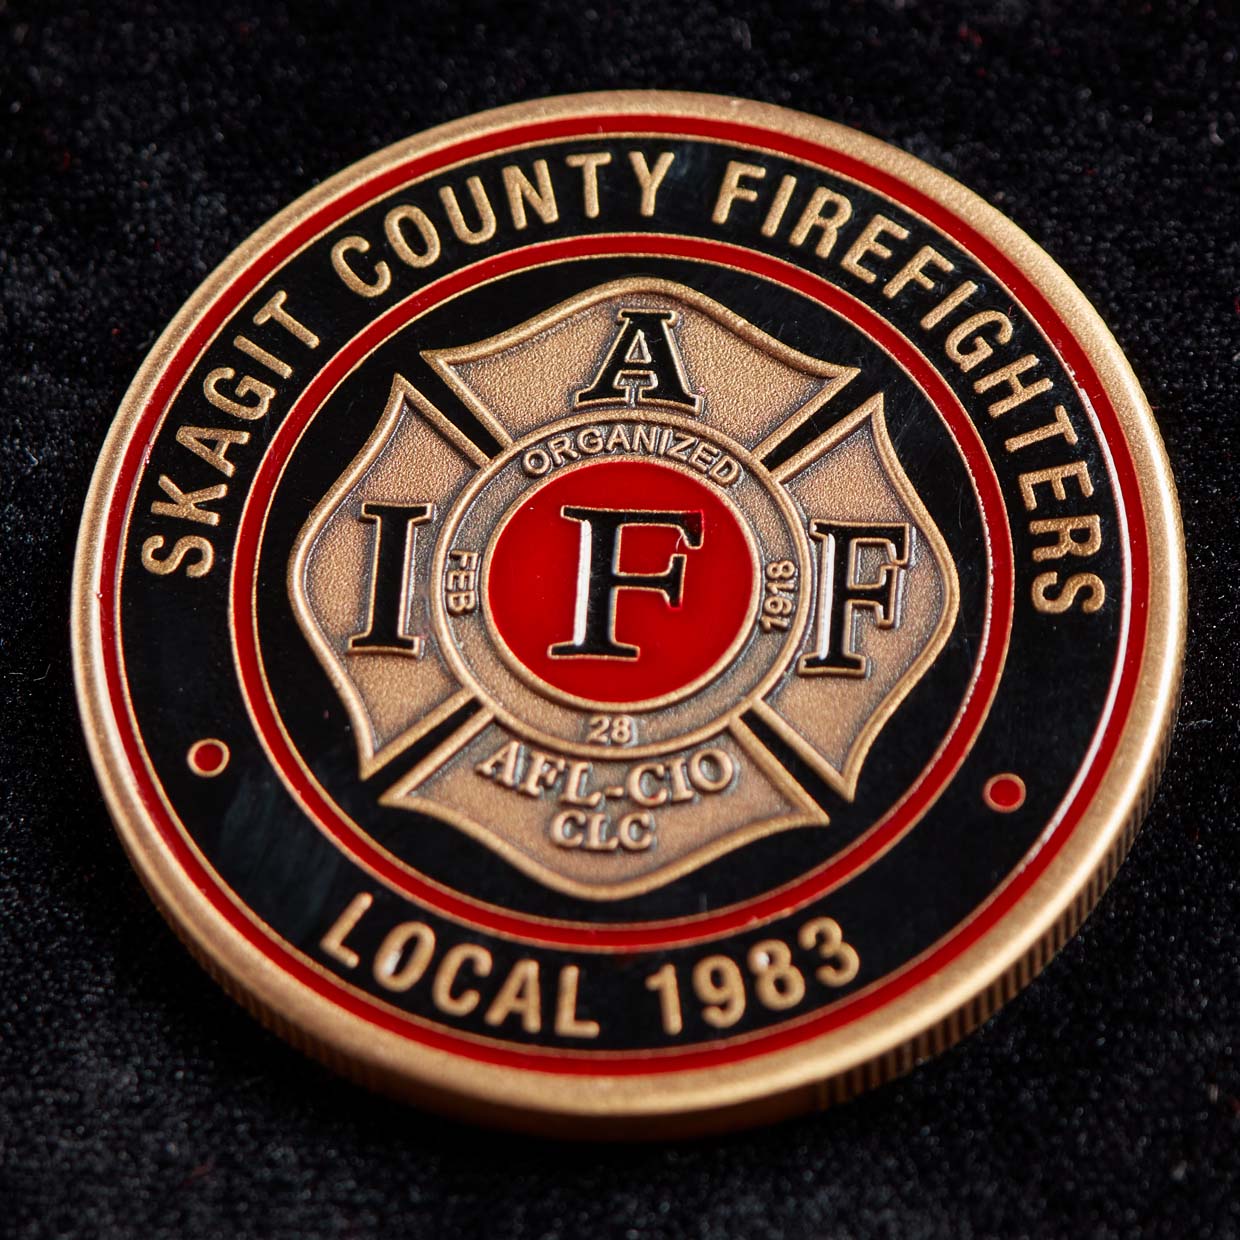 Mount Vernon Skagit County Firefighters Coin Detail